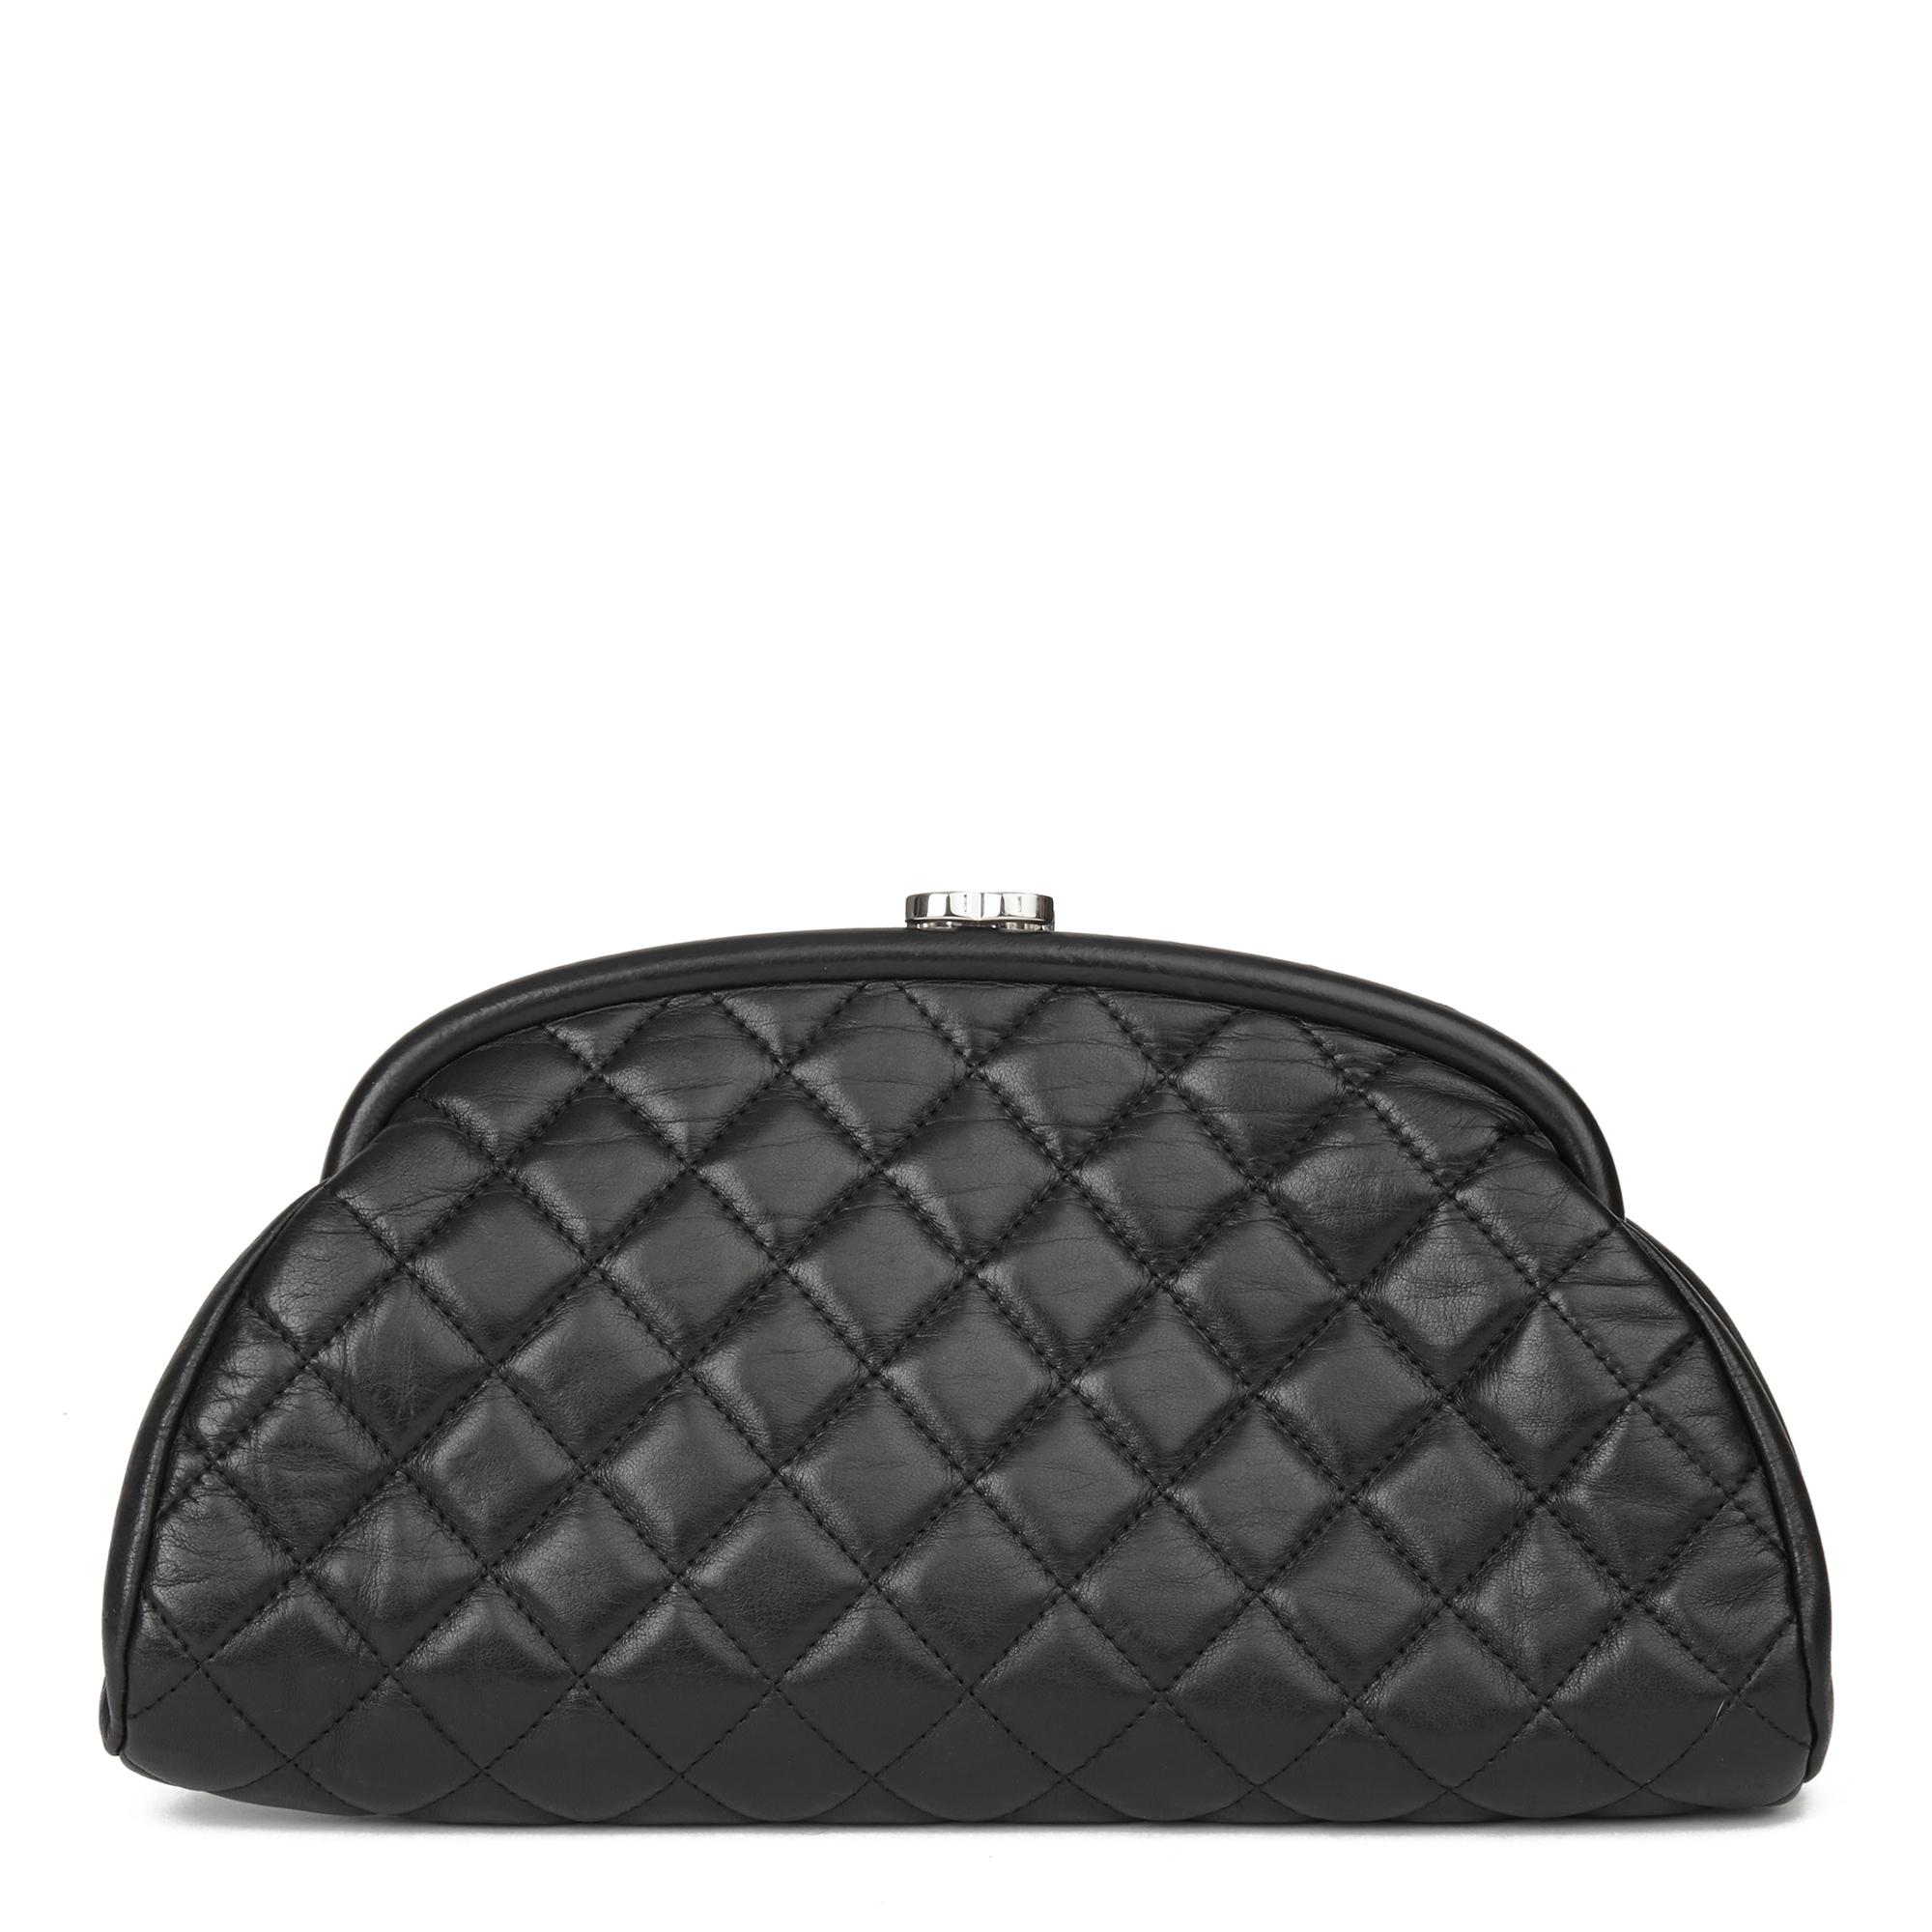 2006 Chanel Black Quilted Lambskin Timeless Clutch Bag  1